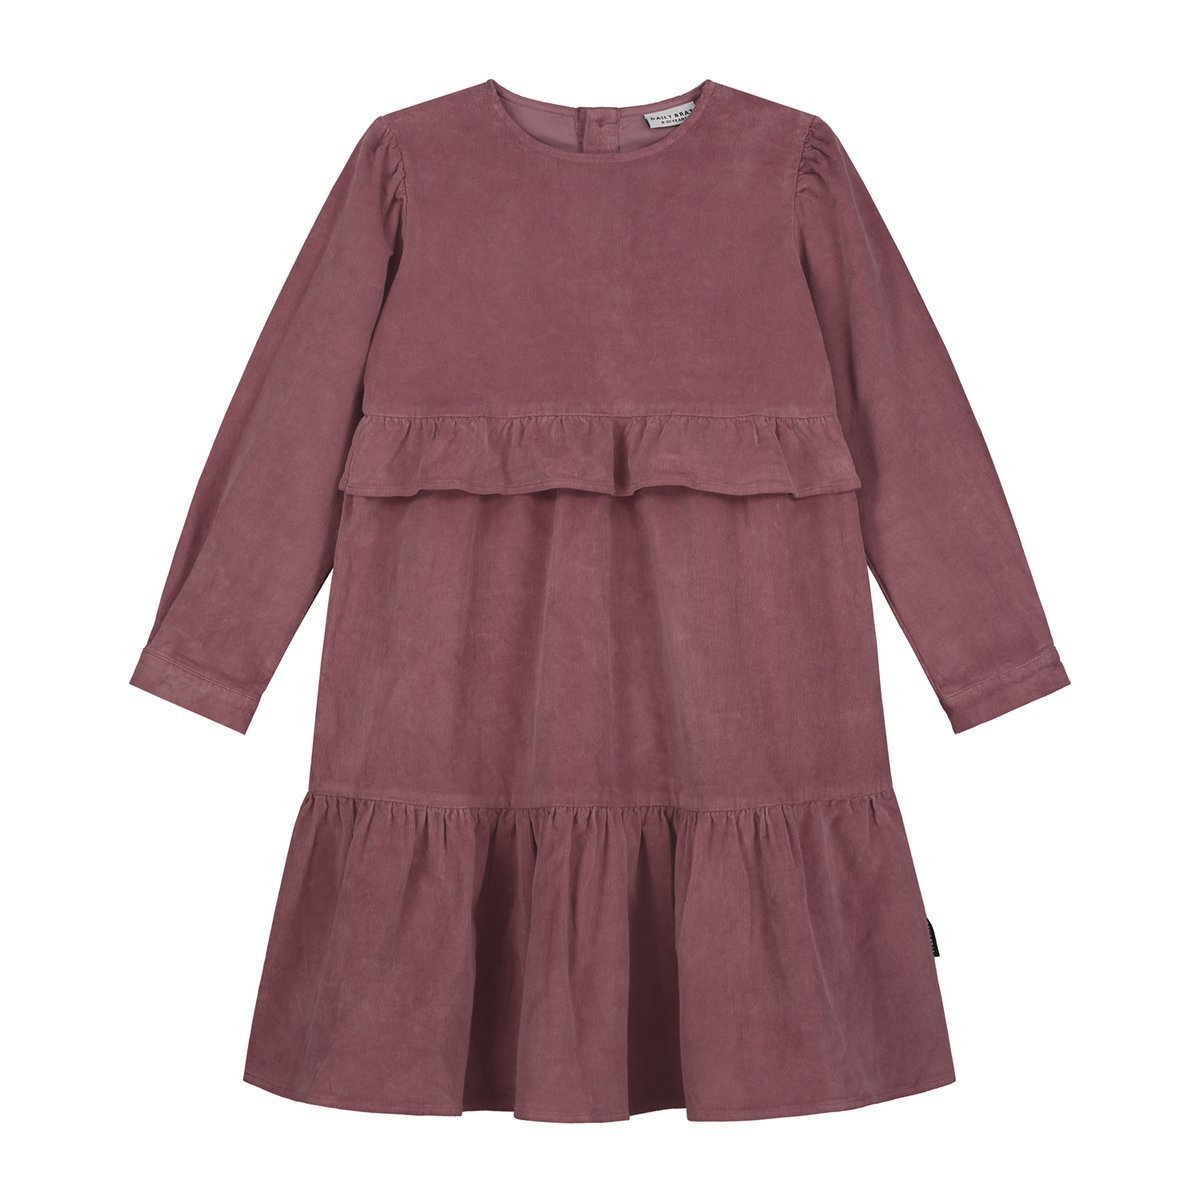 Mila Corduroy Dress find Stylish Fashion for Little People- at Little Foxx Concept Store